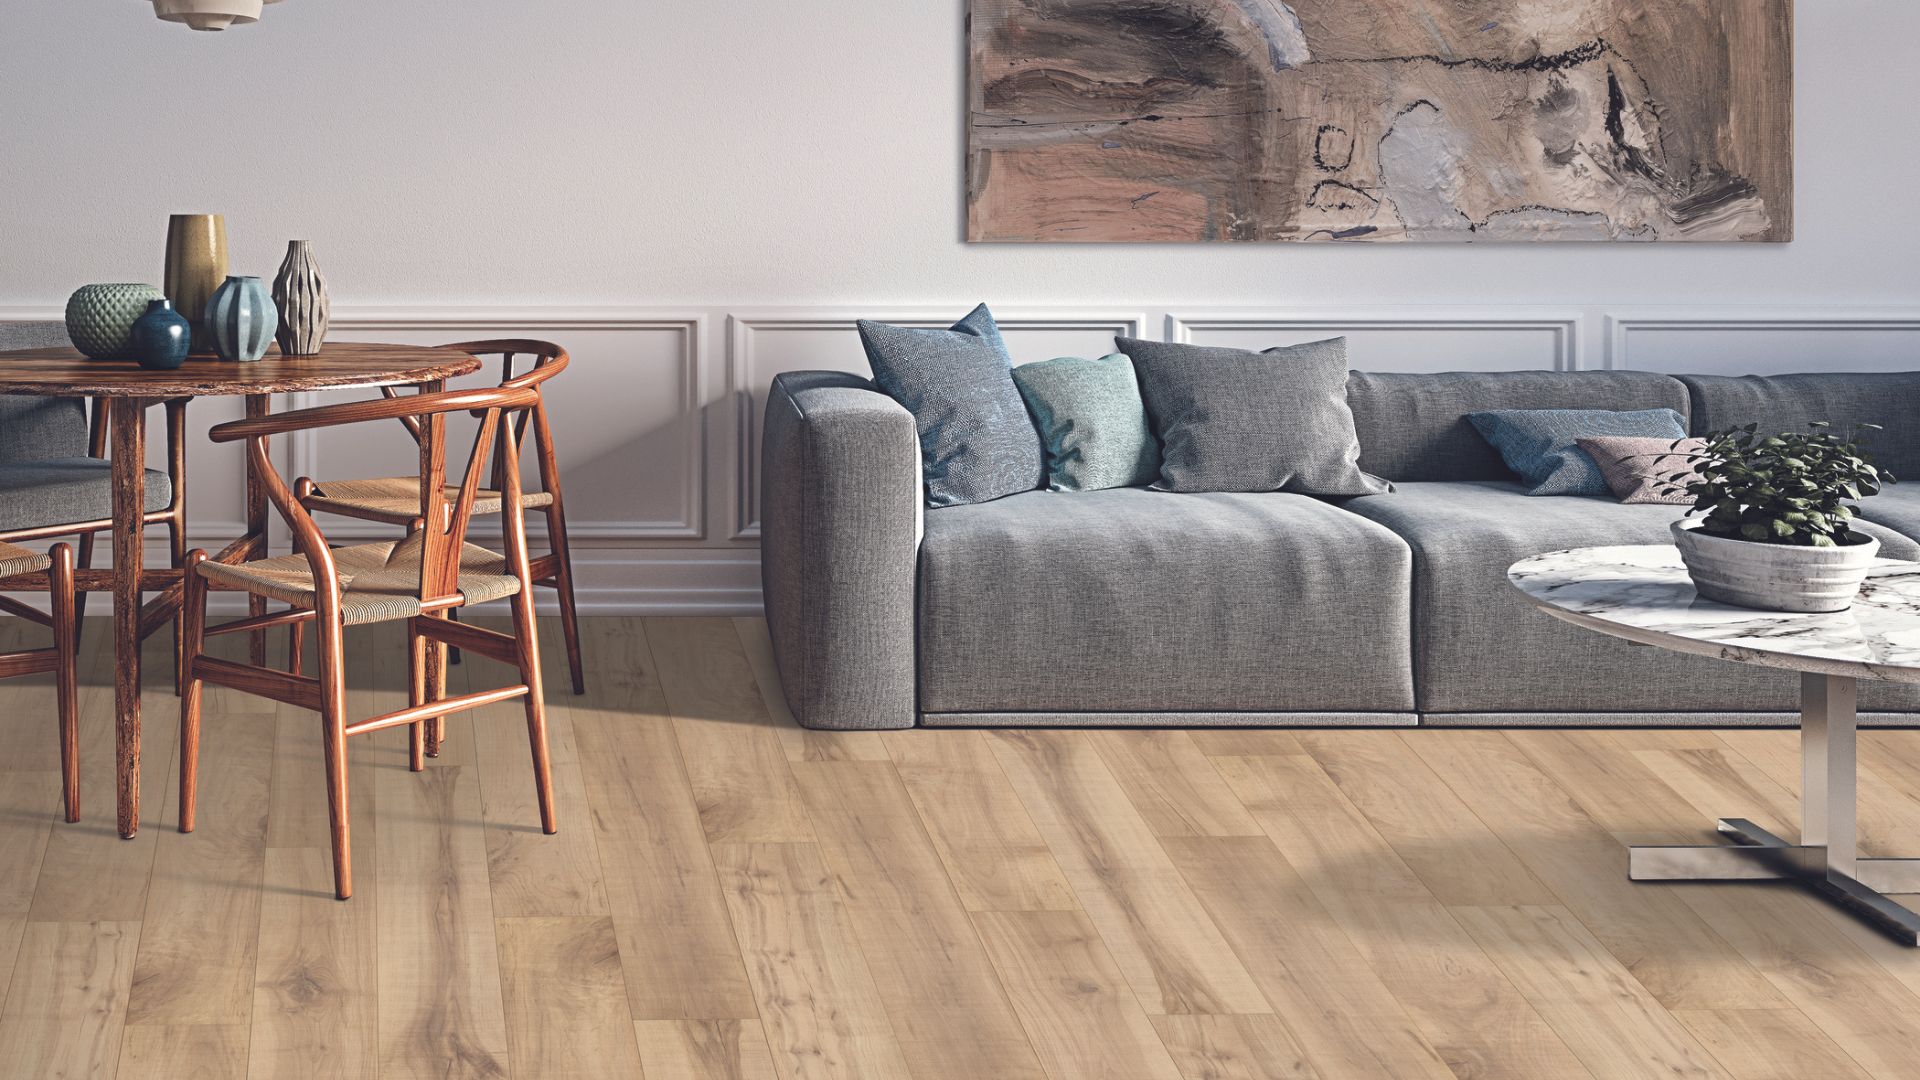 Laminate wood floors in a living area.